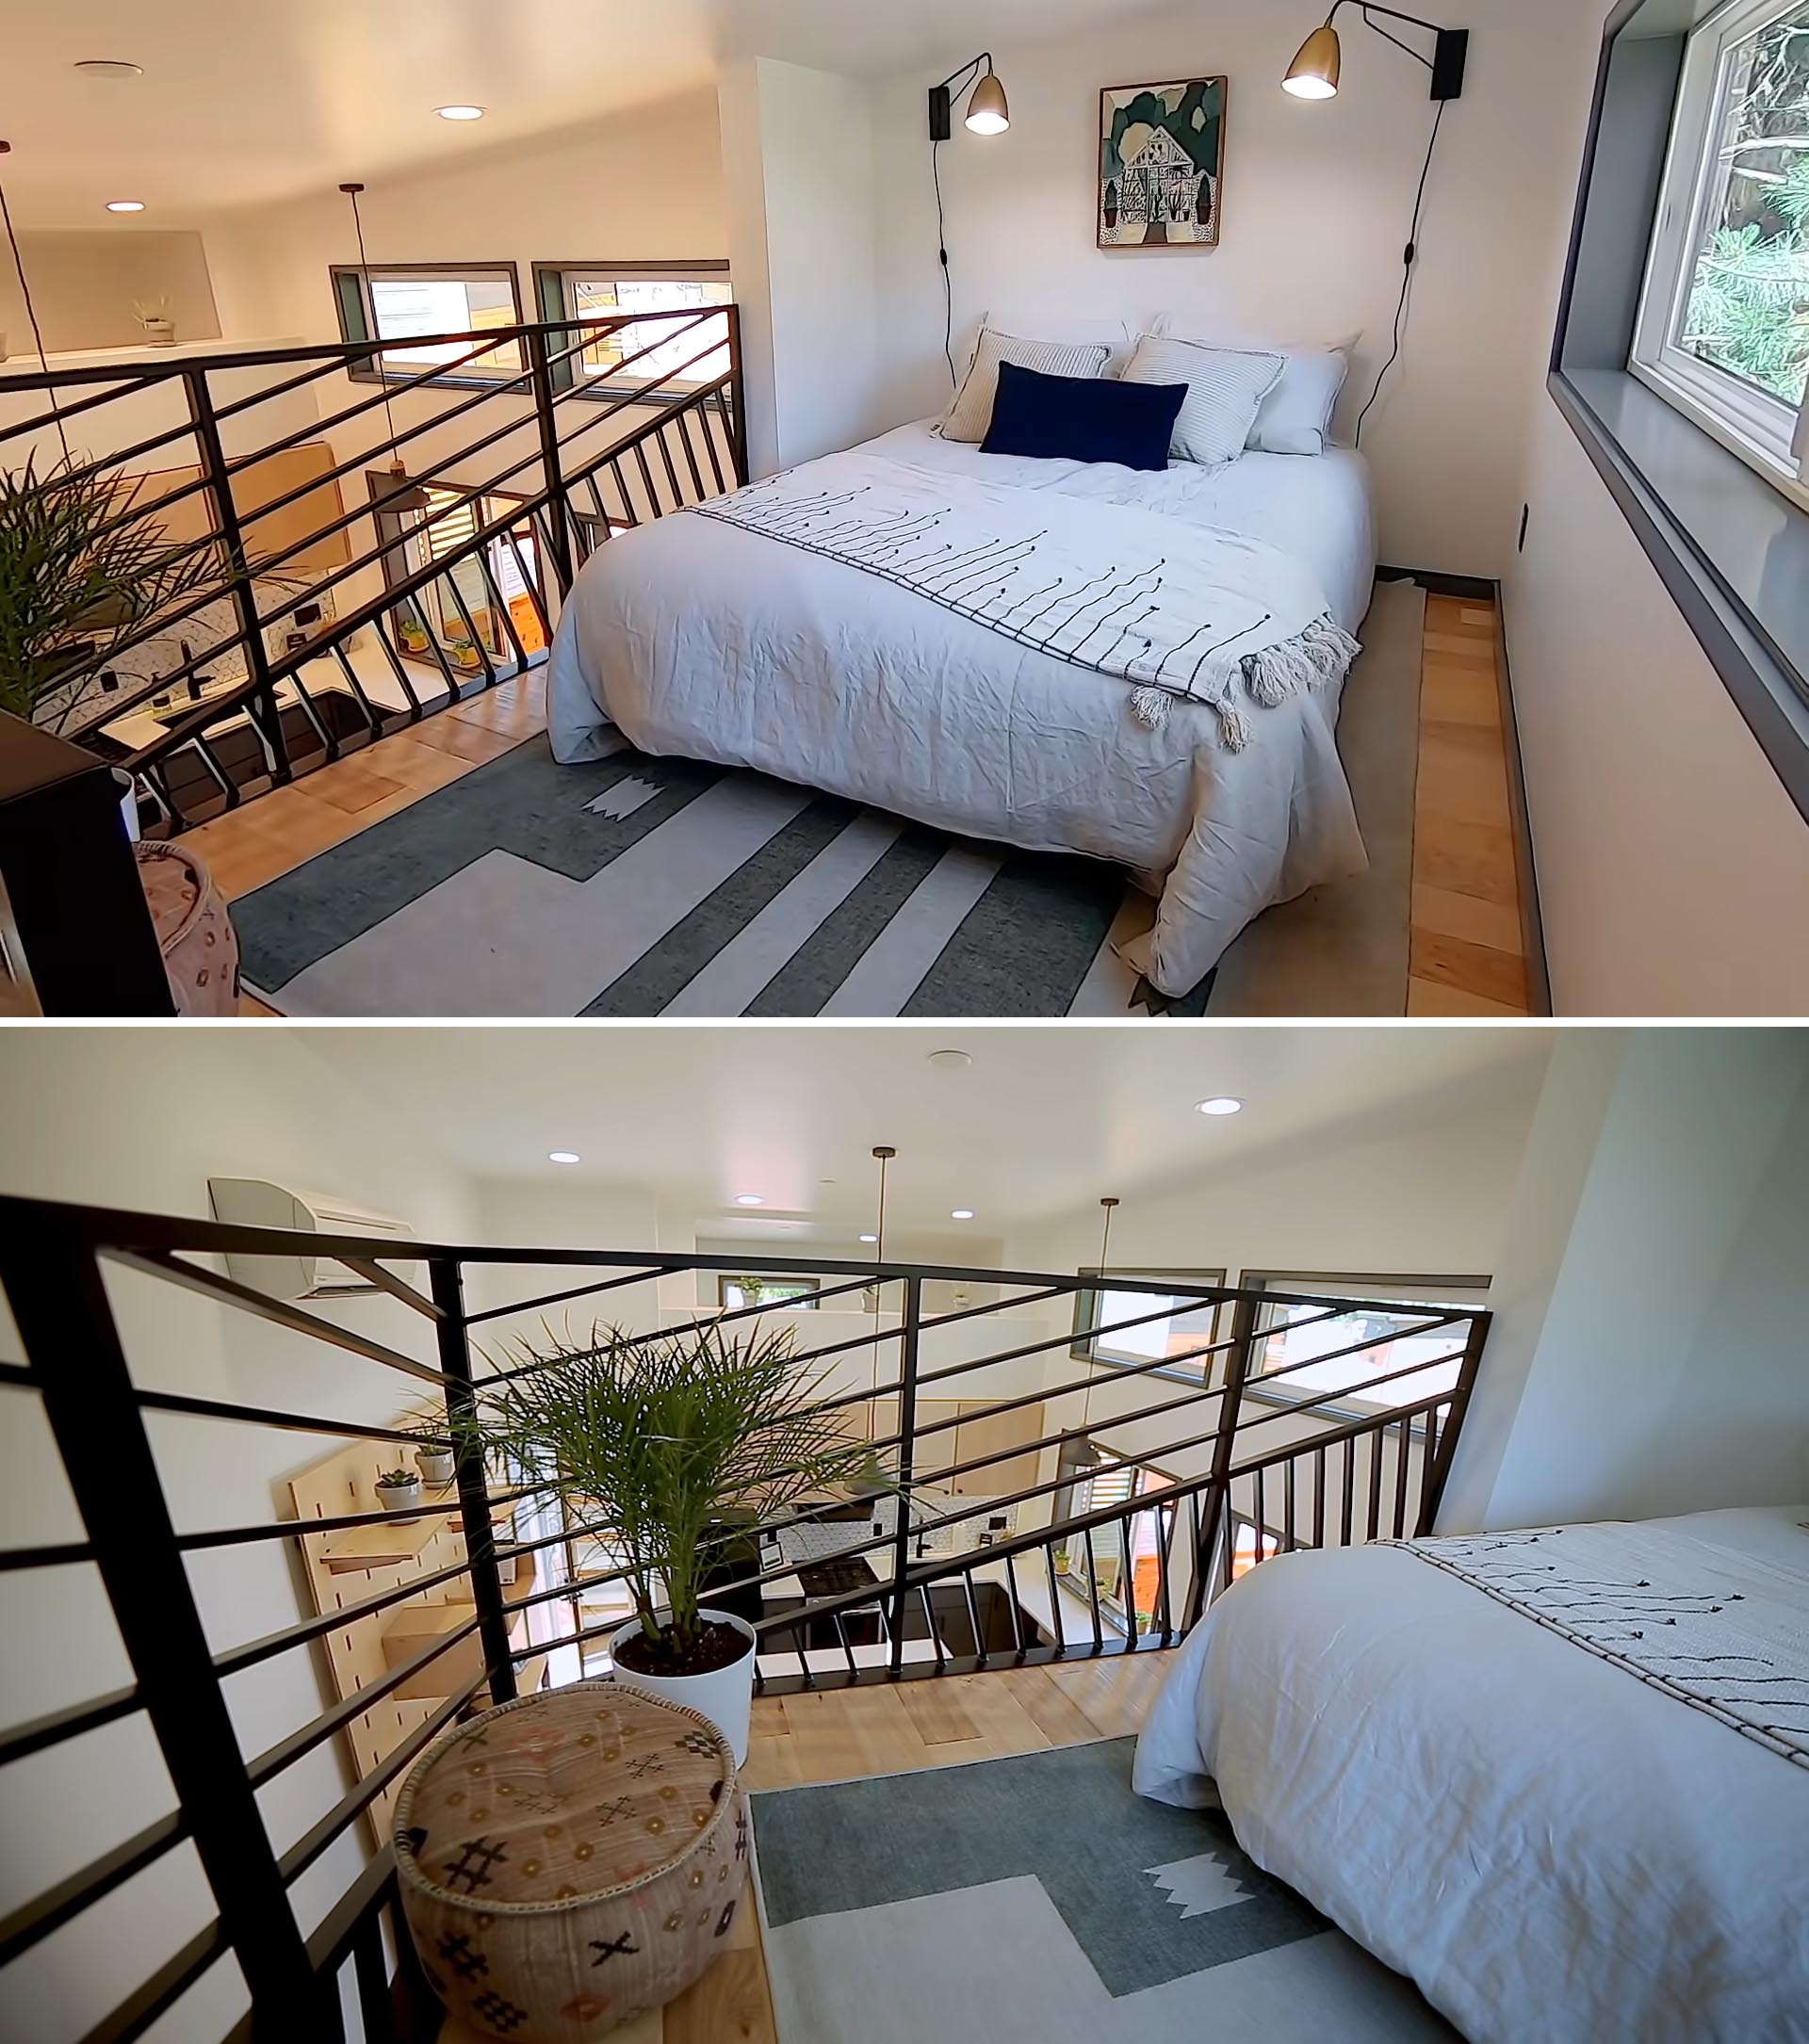 A loft bedroom in a tiny house with an artistic steel railing.